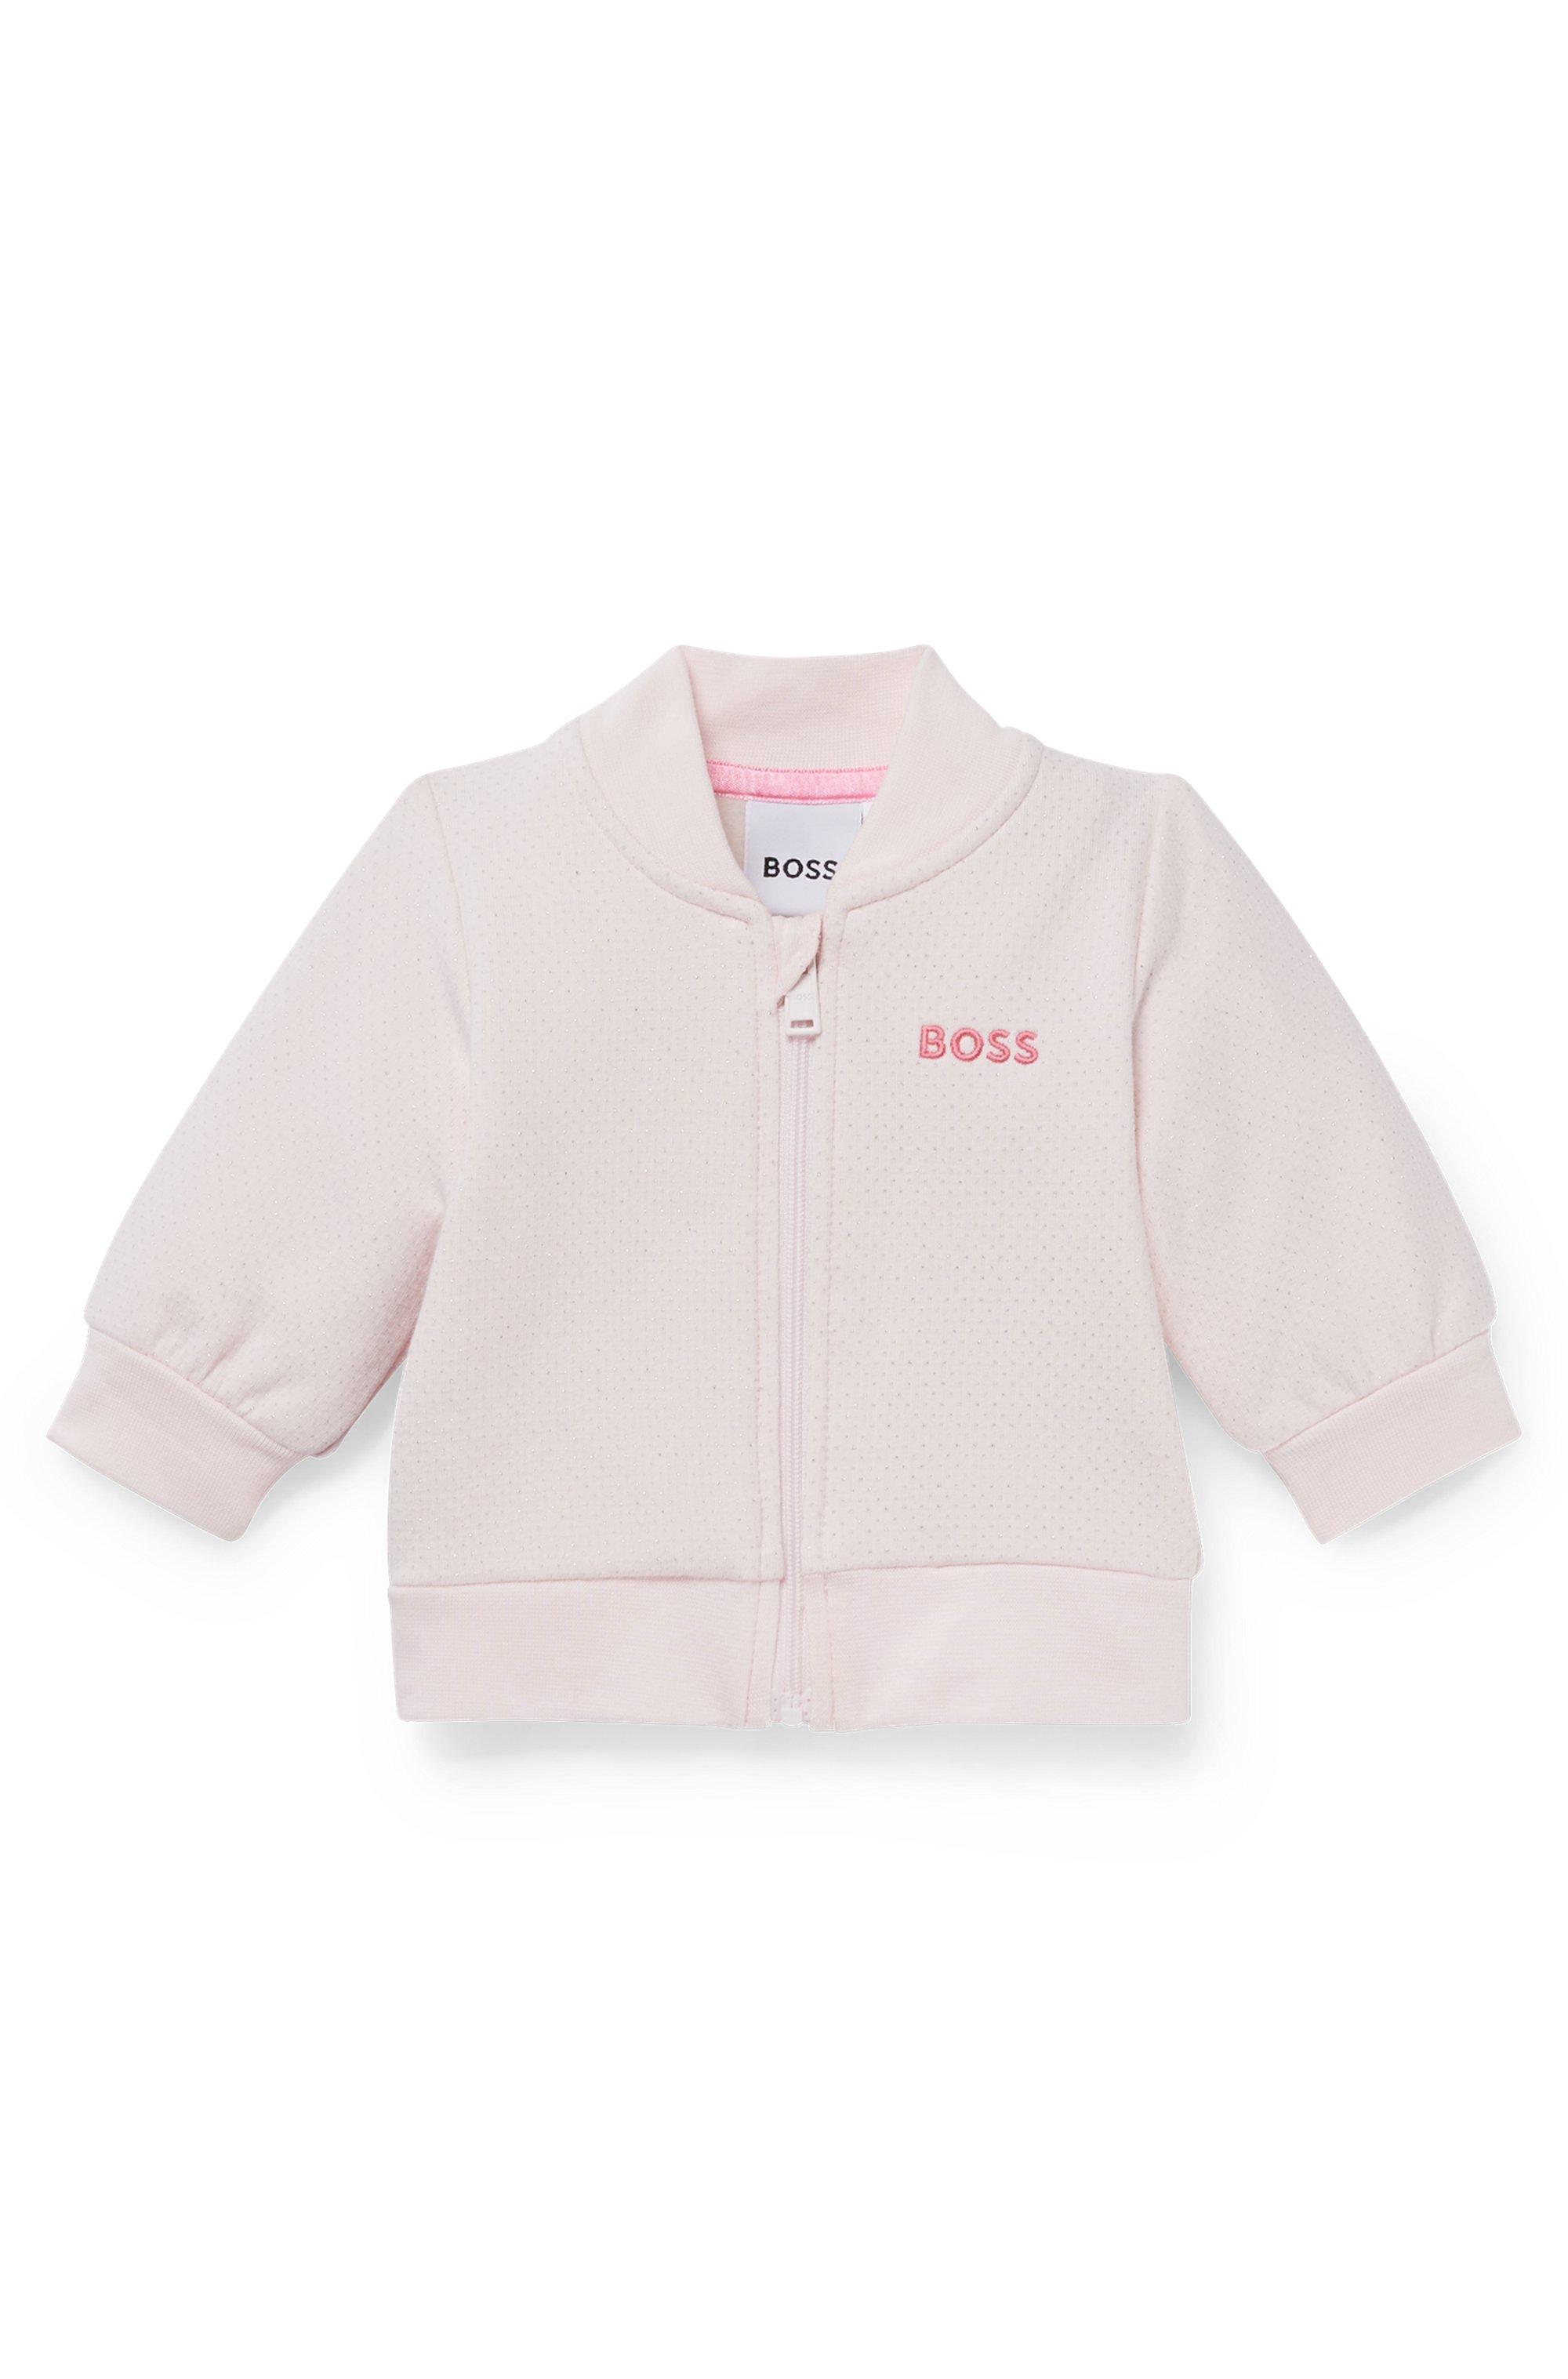 BOSS by HUGO BOSS Baby Cardigan In Cotton-blend Fleece With Embroidered ...